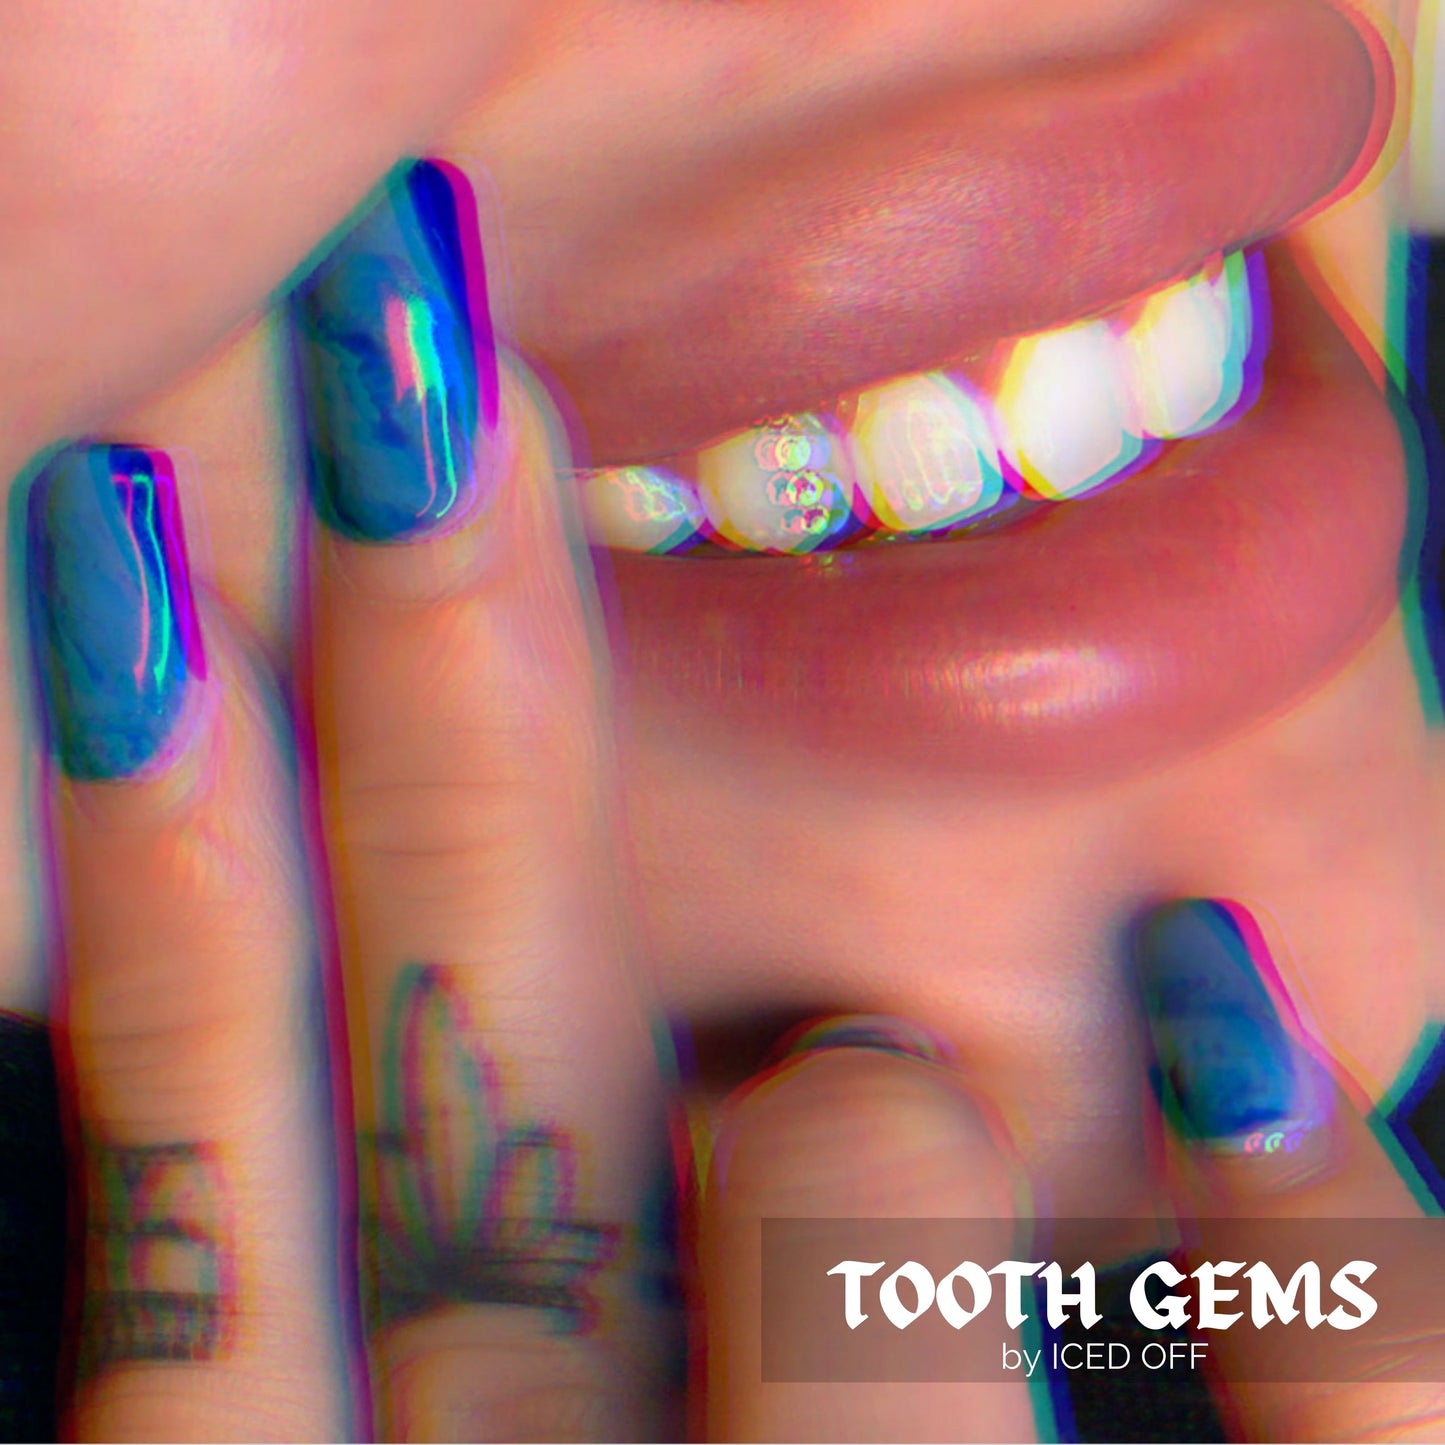 Celebrate our 5th Anniversary with Tooth Gems by Iced Off Chicago